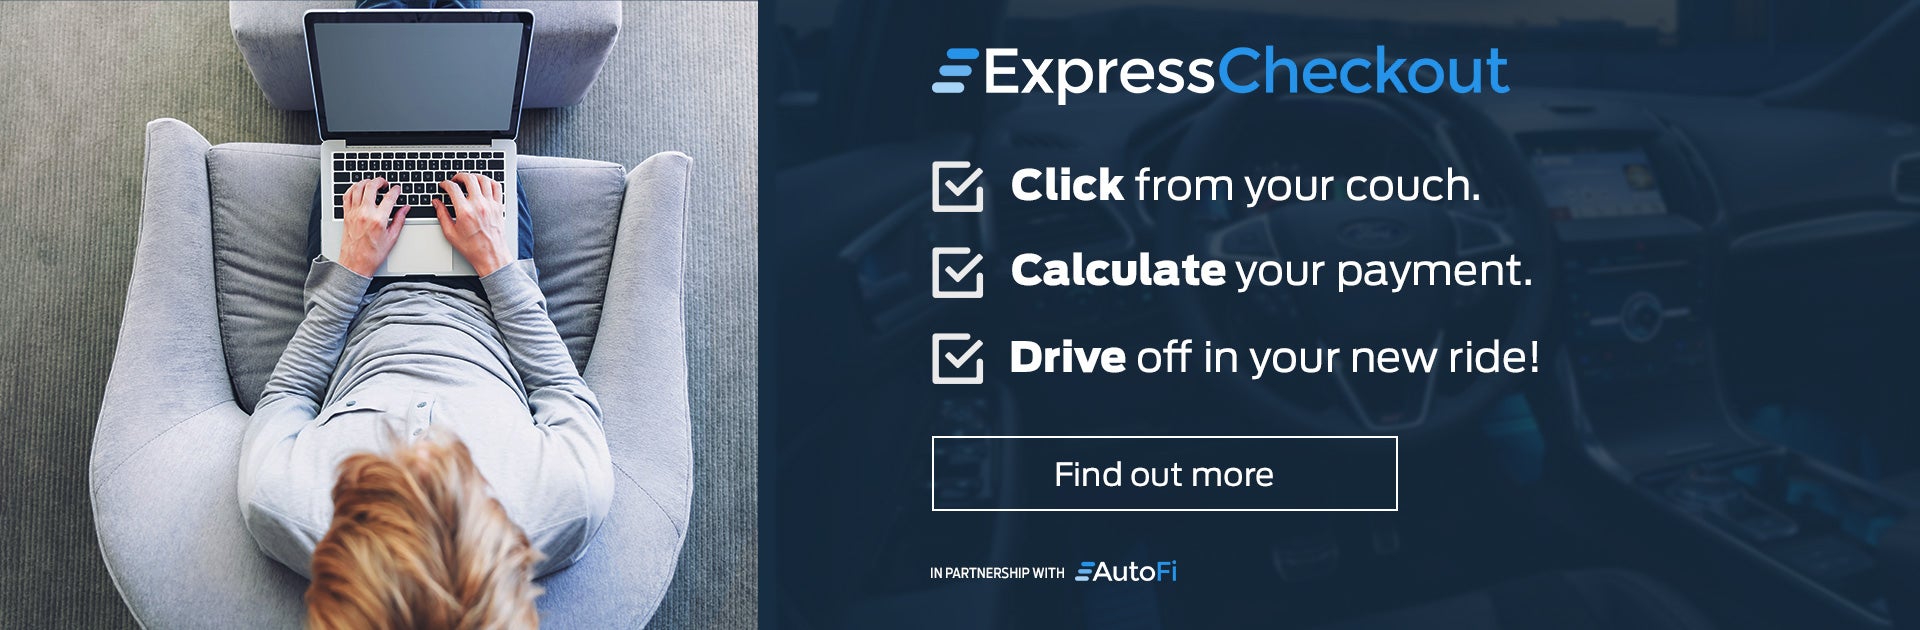 Express Checkout Offered By AutoFI @ Harris Ford